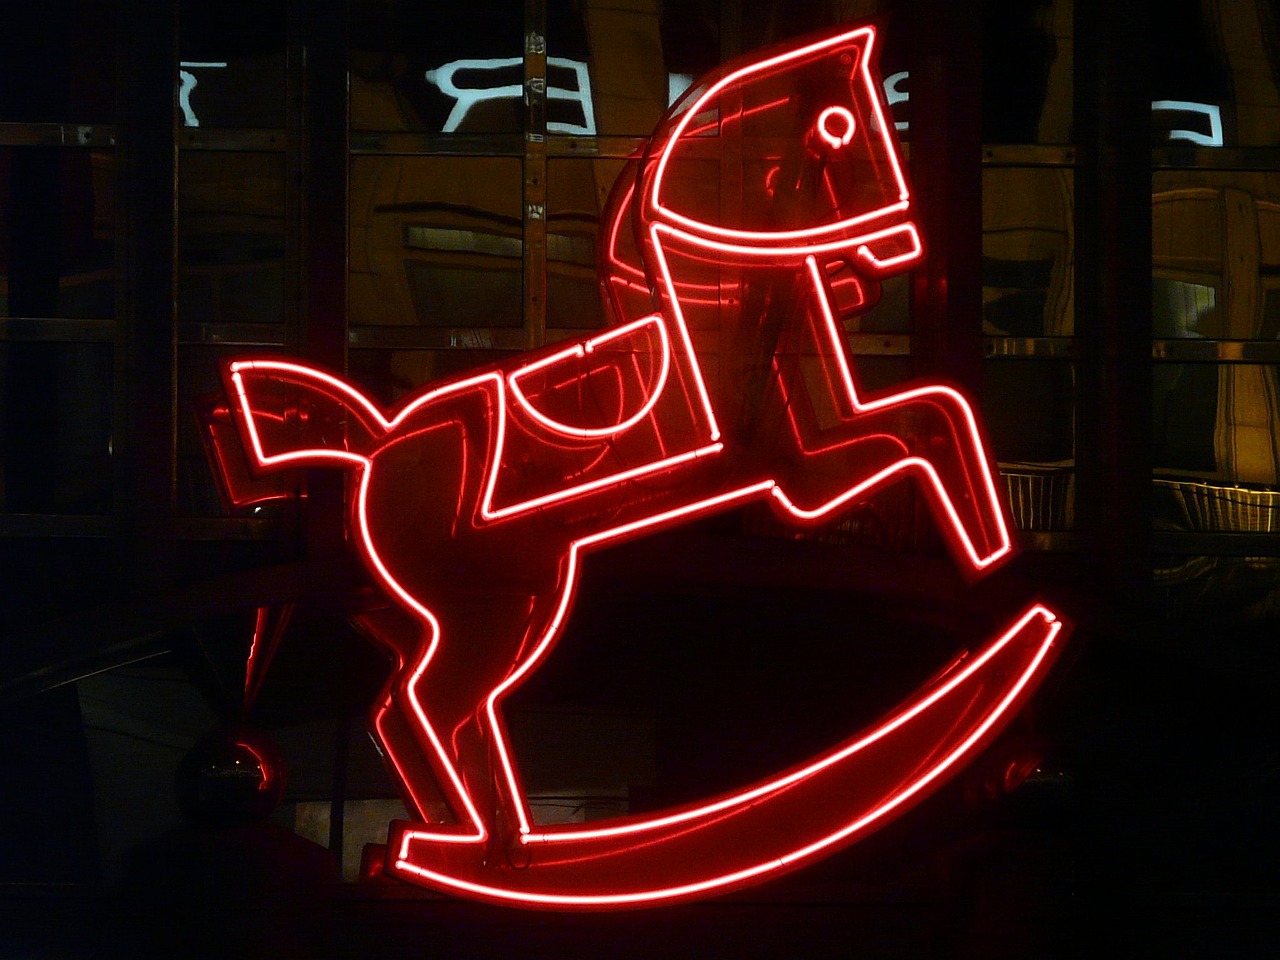 advertisement,neon sign,neon,neon light,neon red,rocking horse,horse,seahorses,red,free pictures, free photos, free images, royalty free, free illustrations, public domain